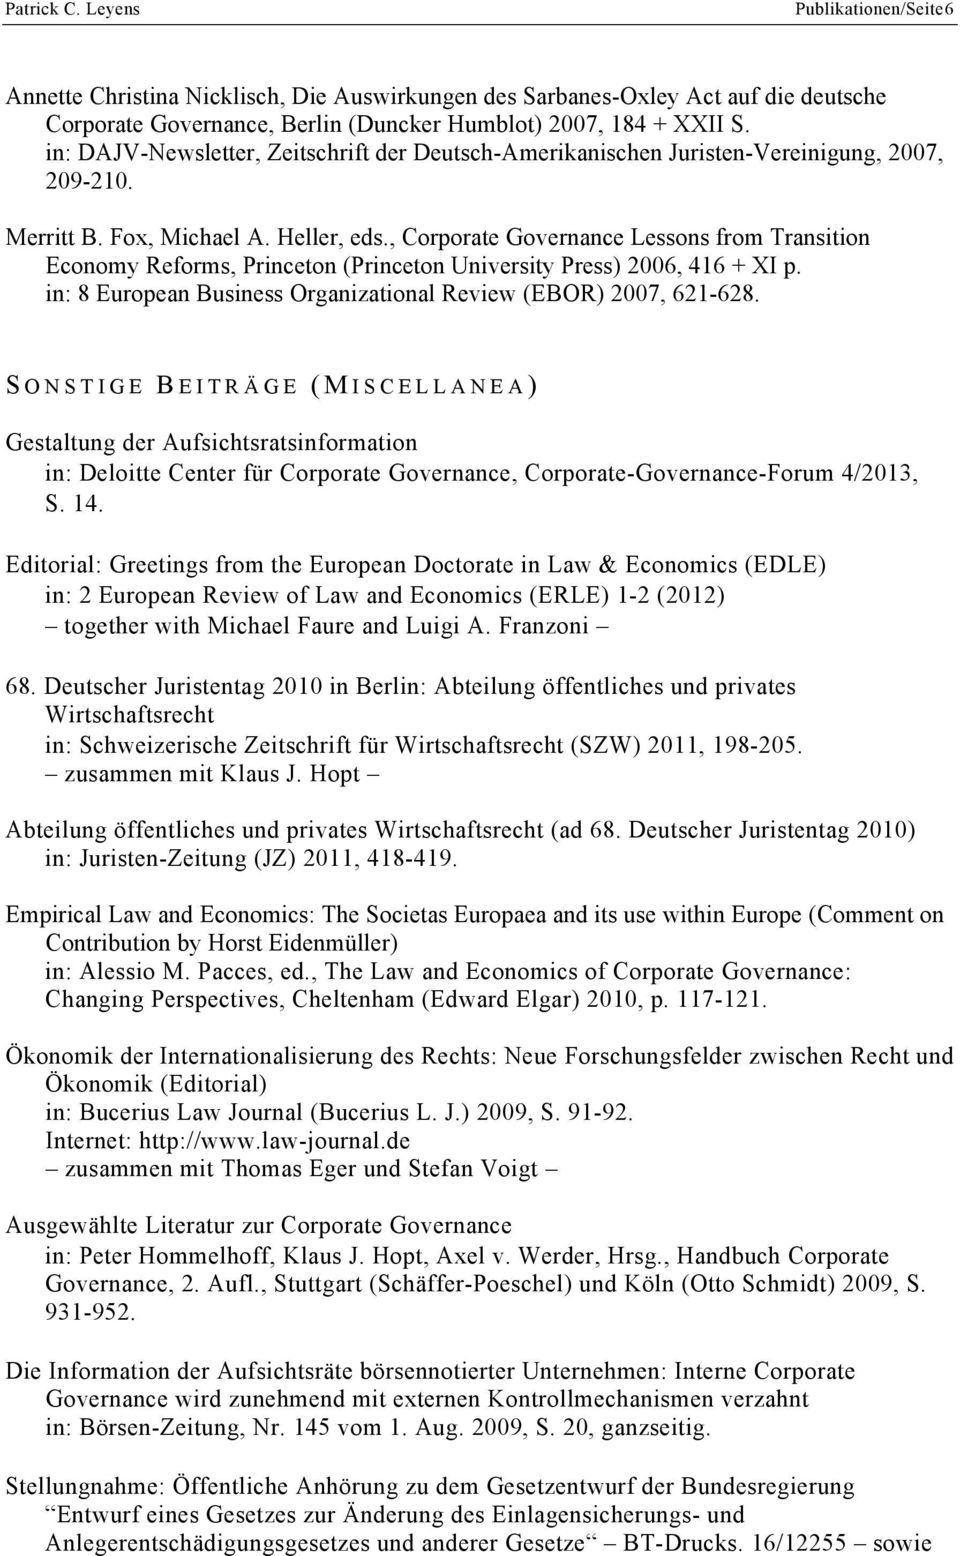 , Corporate Governance Lessons from Transition Economy Reforms, Princeton (Princeton University Press) 2006, 416 + XI p. in: 8 European Business Organizational Review (EBOR) 2007, 621-628.